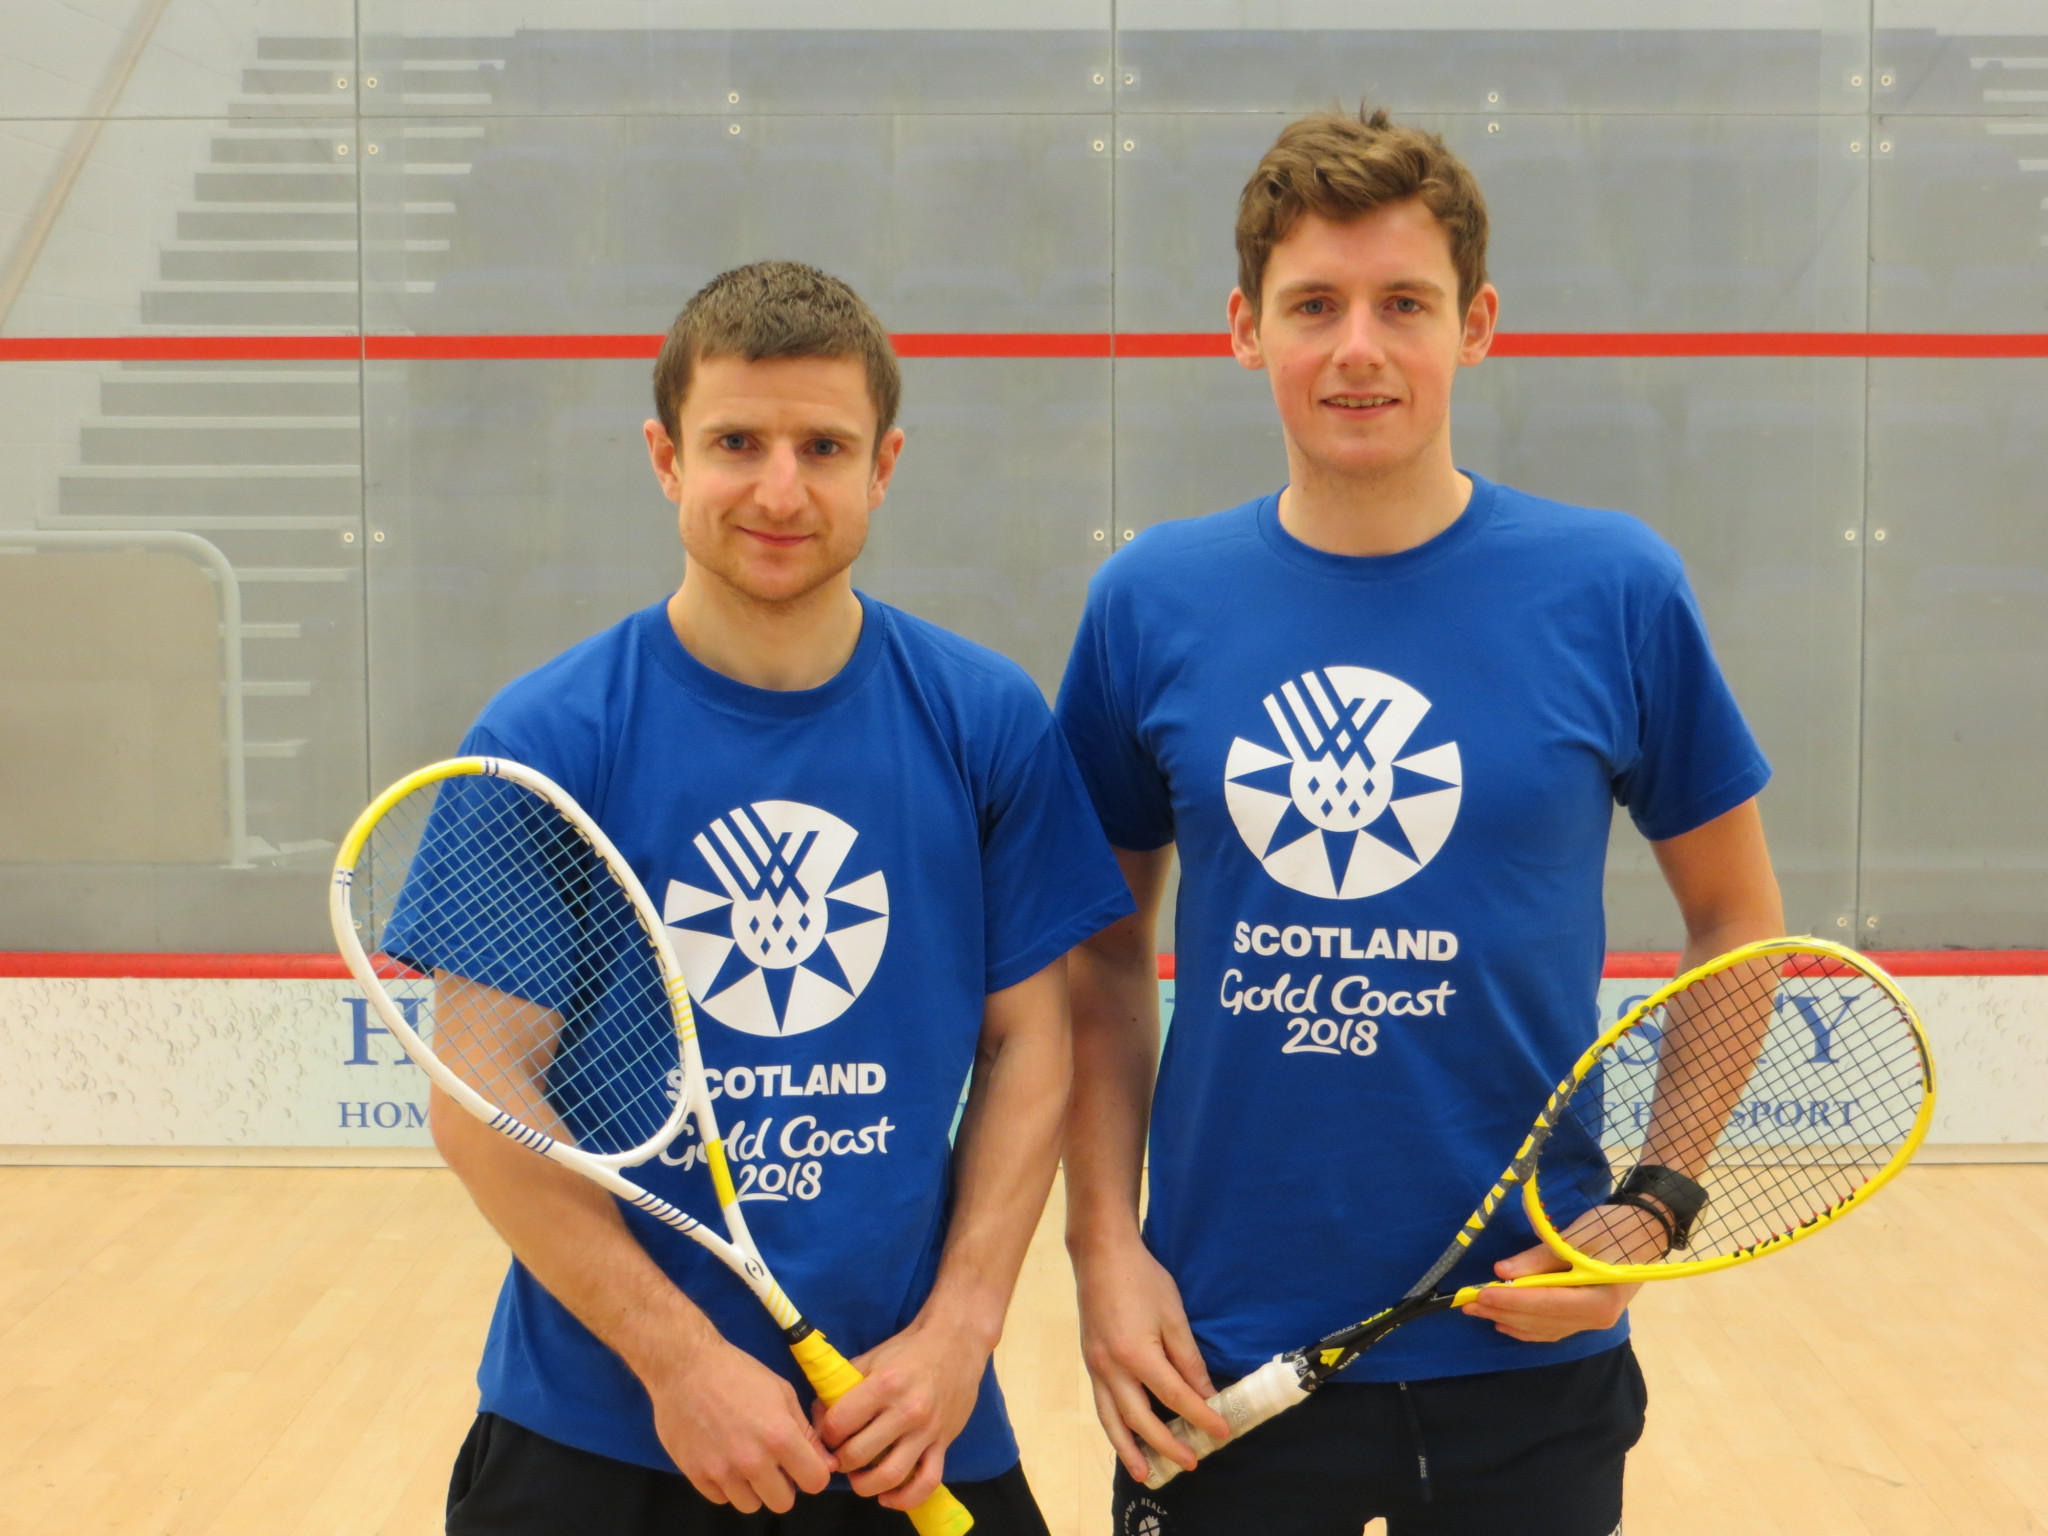 Squash players Clyne and Lobban selected to compete for Scotland at Gold Coast 2018